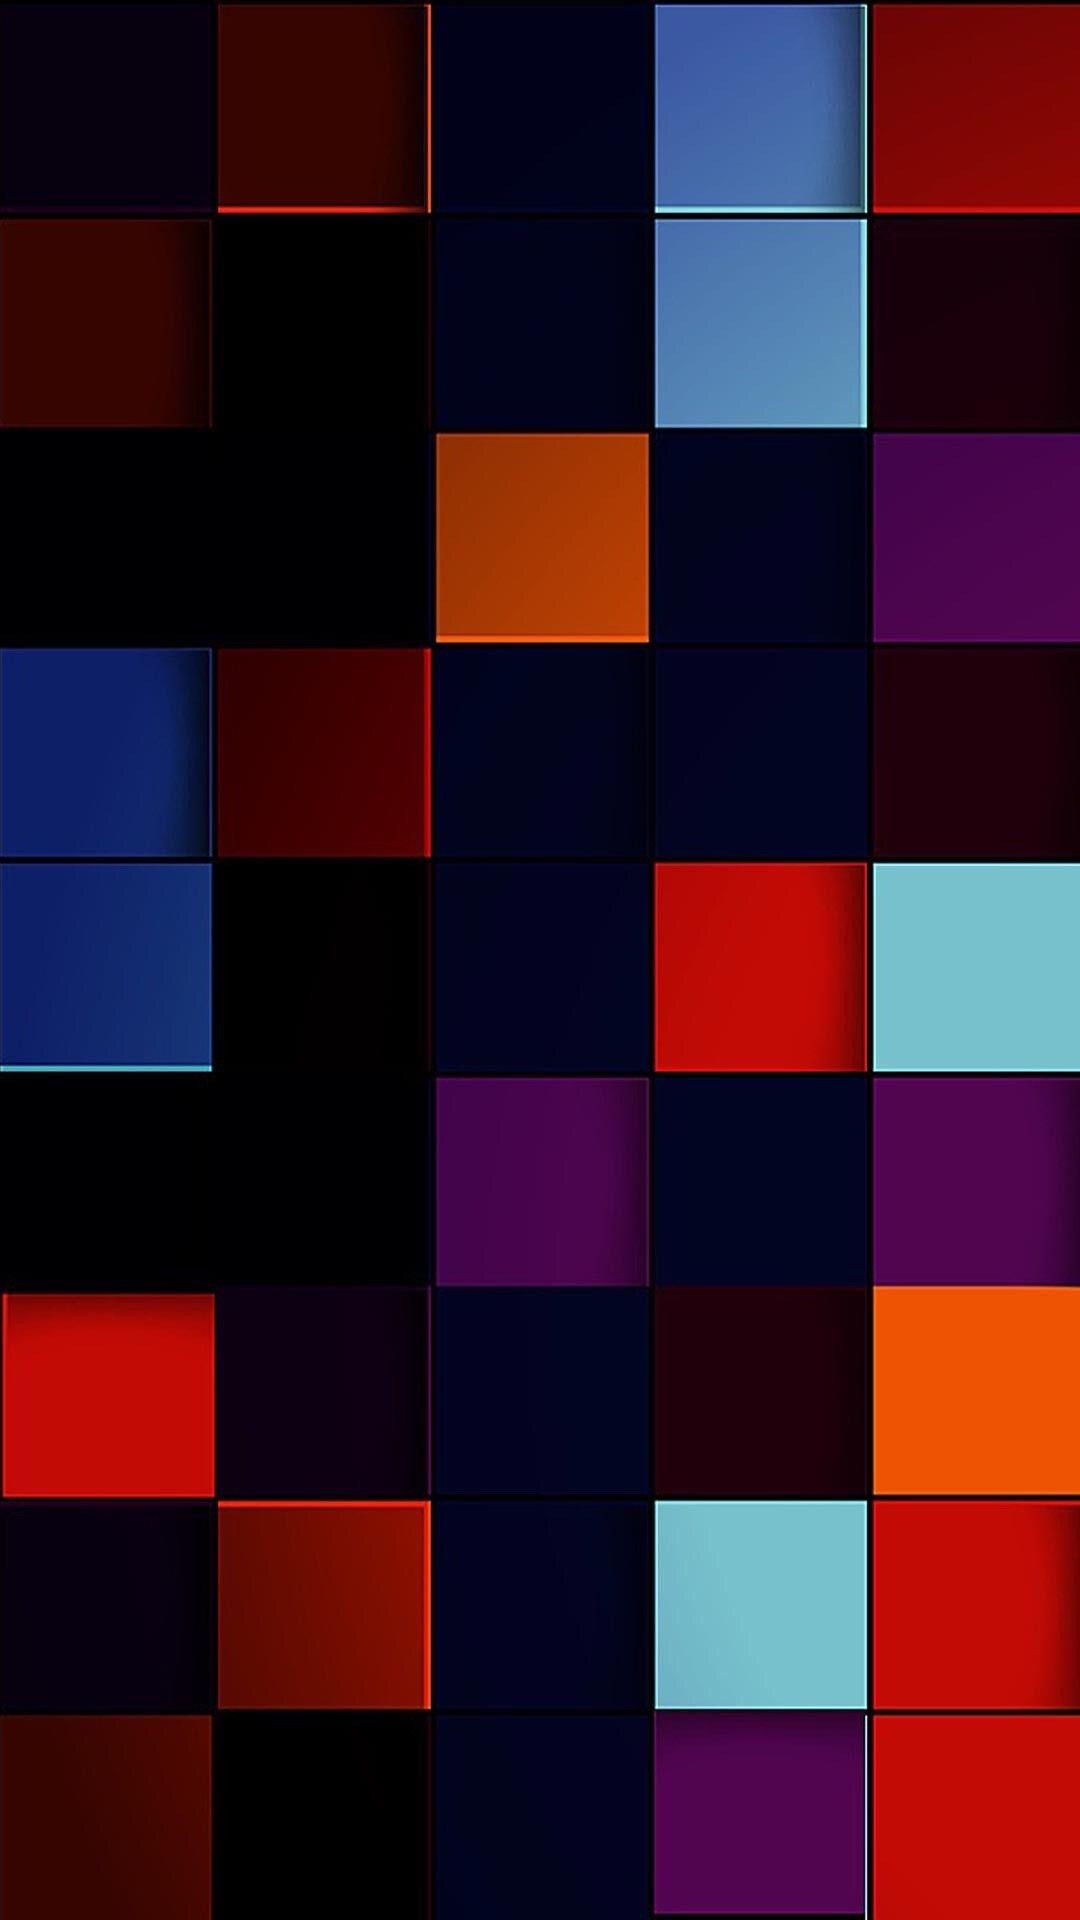 Colorful Geometric Shapes Wallpaper. Abstract iphone wallpaper